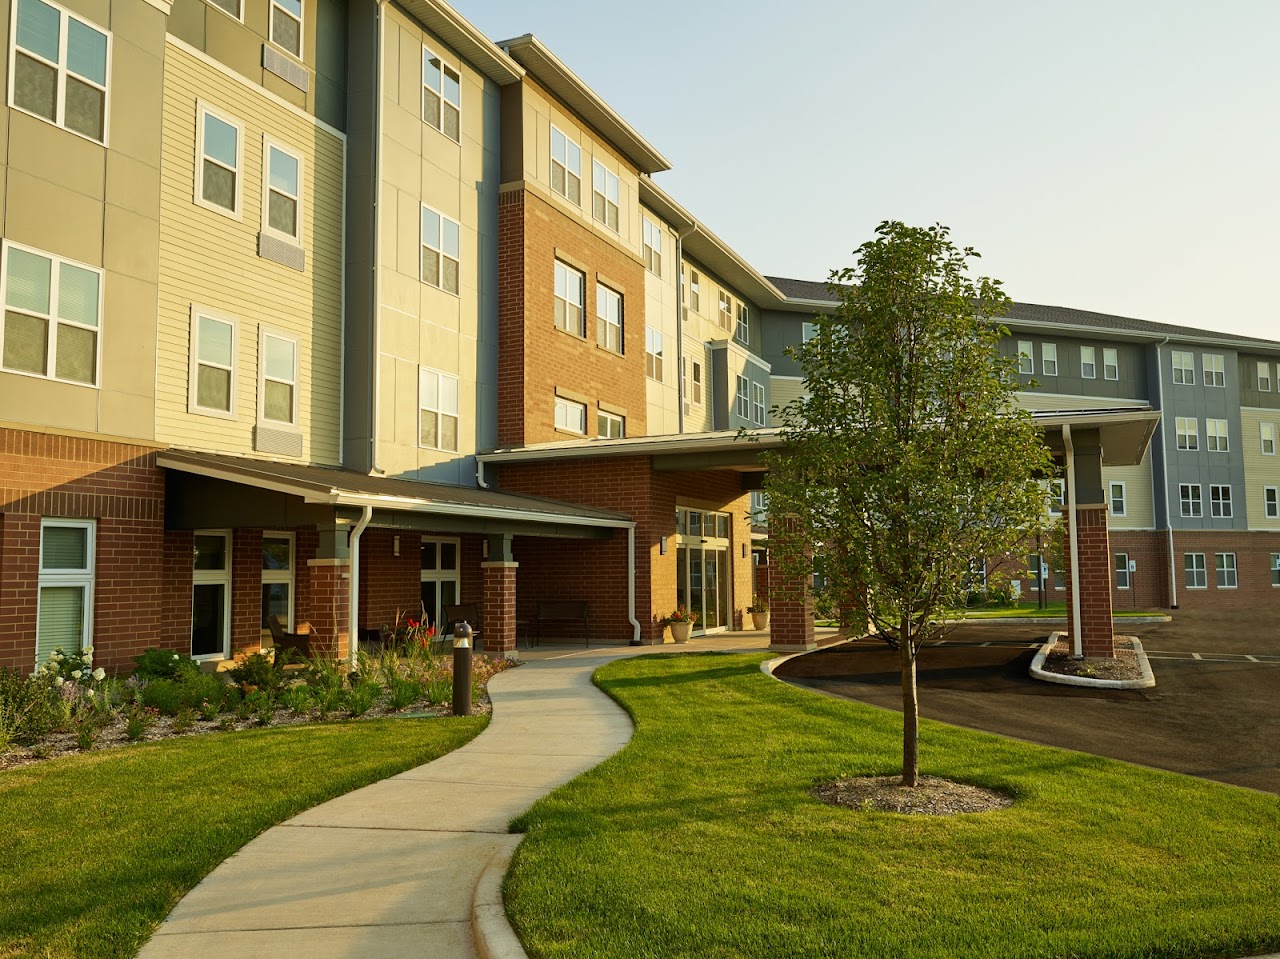 Photo of SOHL AVENUE ASSISTED LIVING. Affordable housing located at 5640 SOHL AVENUE HAMMOND, IN 46230